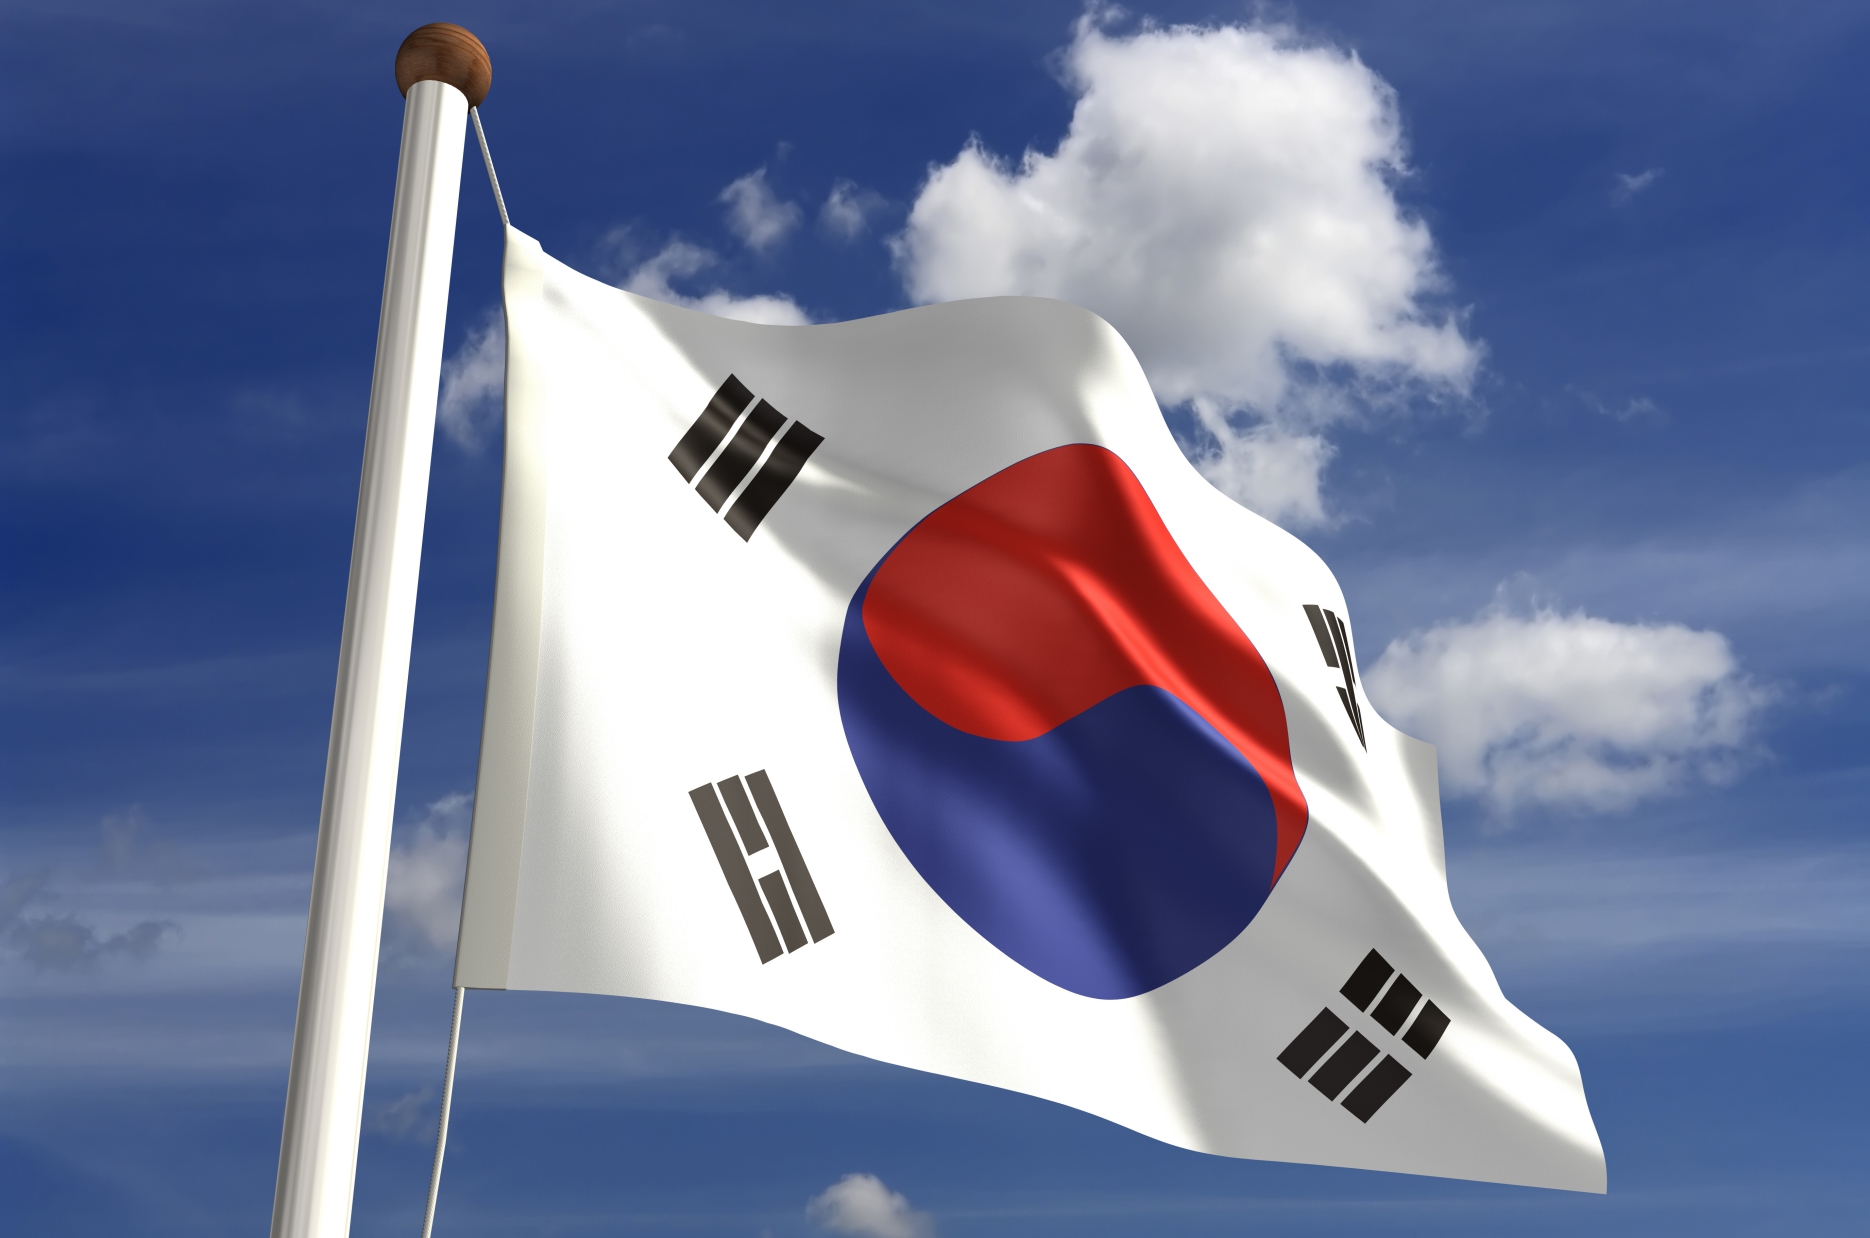 South Korea pushes for AI semiconductors as global demand grows